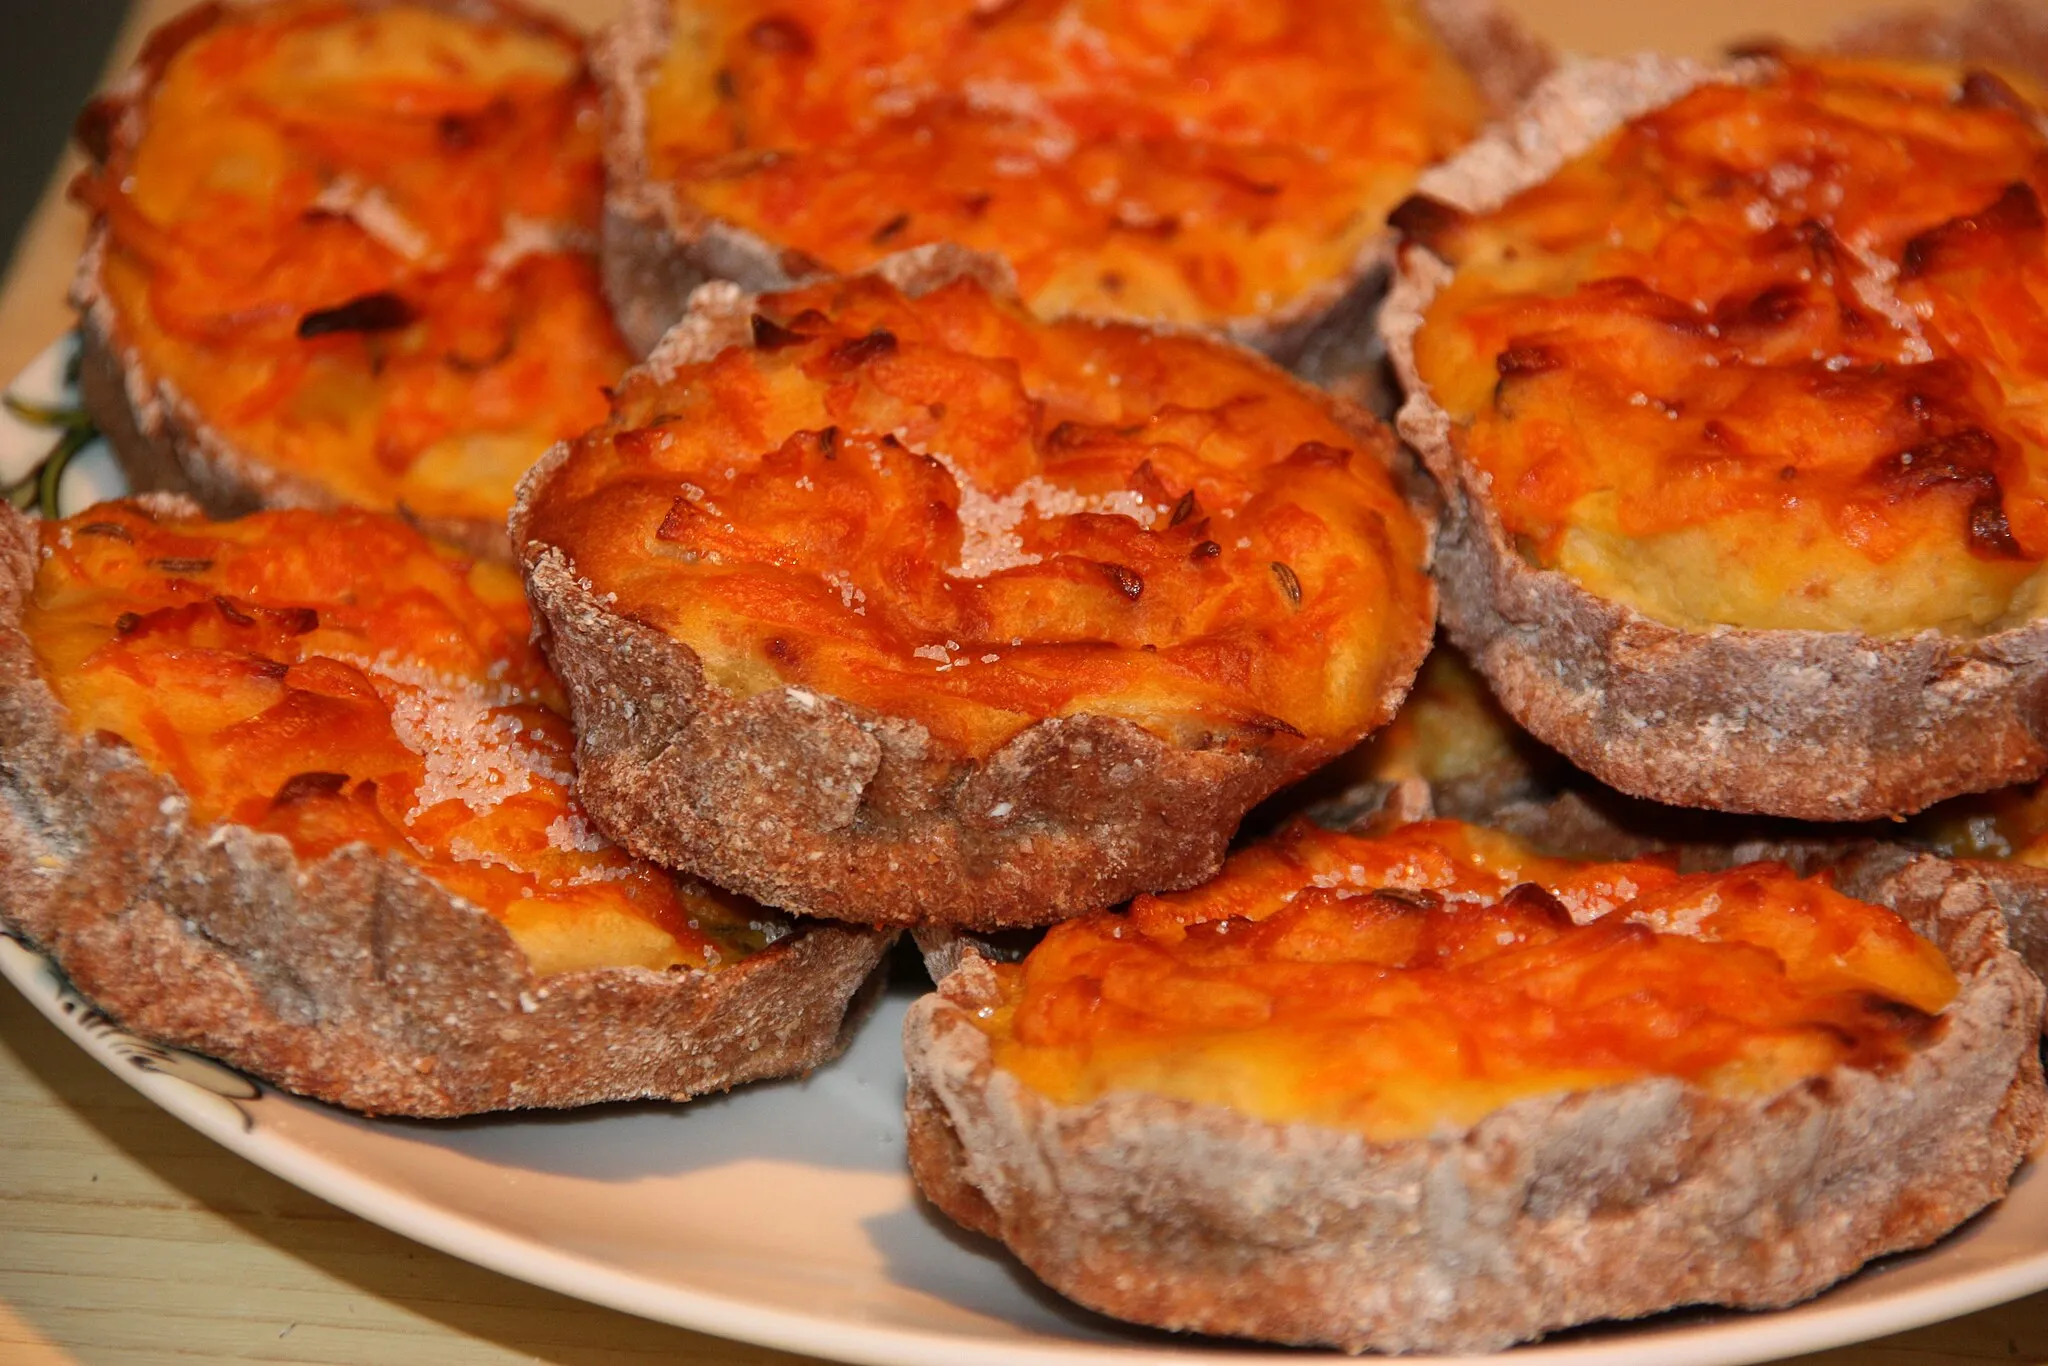 Photo showing: The sklandrausis, a small, almost bite-sized pie made of rye flour with a filling of potatoes and carrots, a unique dish from the western part of Latvia, Kurzeme, has received a “Traditional Speciality Guaranteed” designation from the European Commission.